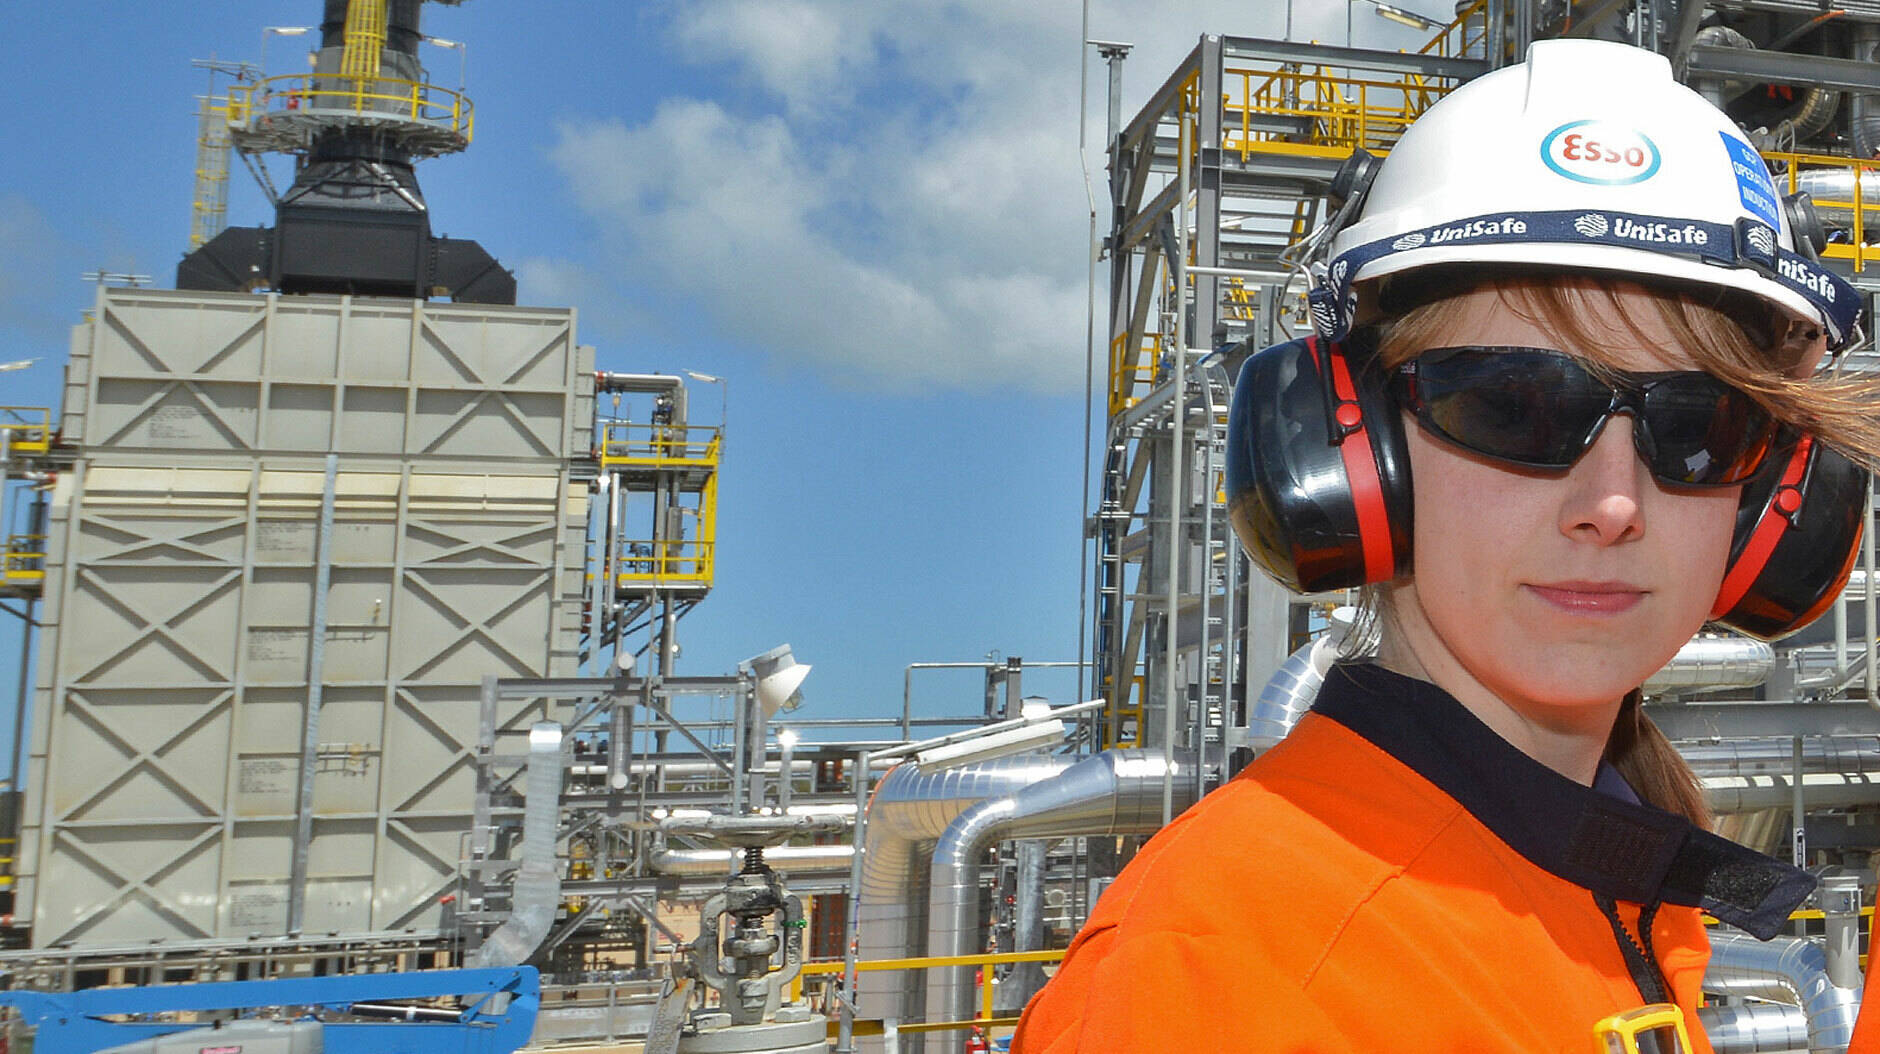 Image Photo — “Reliability of the Gas Conditioning plant is key to our future success,” says Longford's first female Operations Supervisor, Liz Anderson.